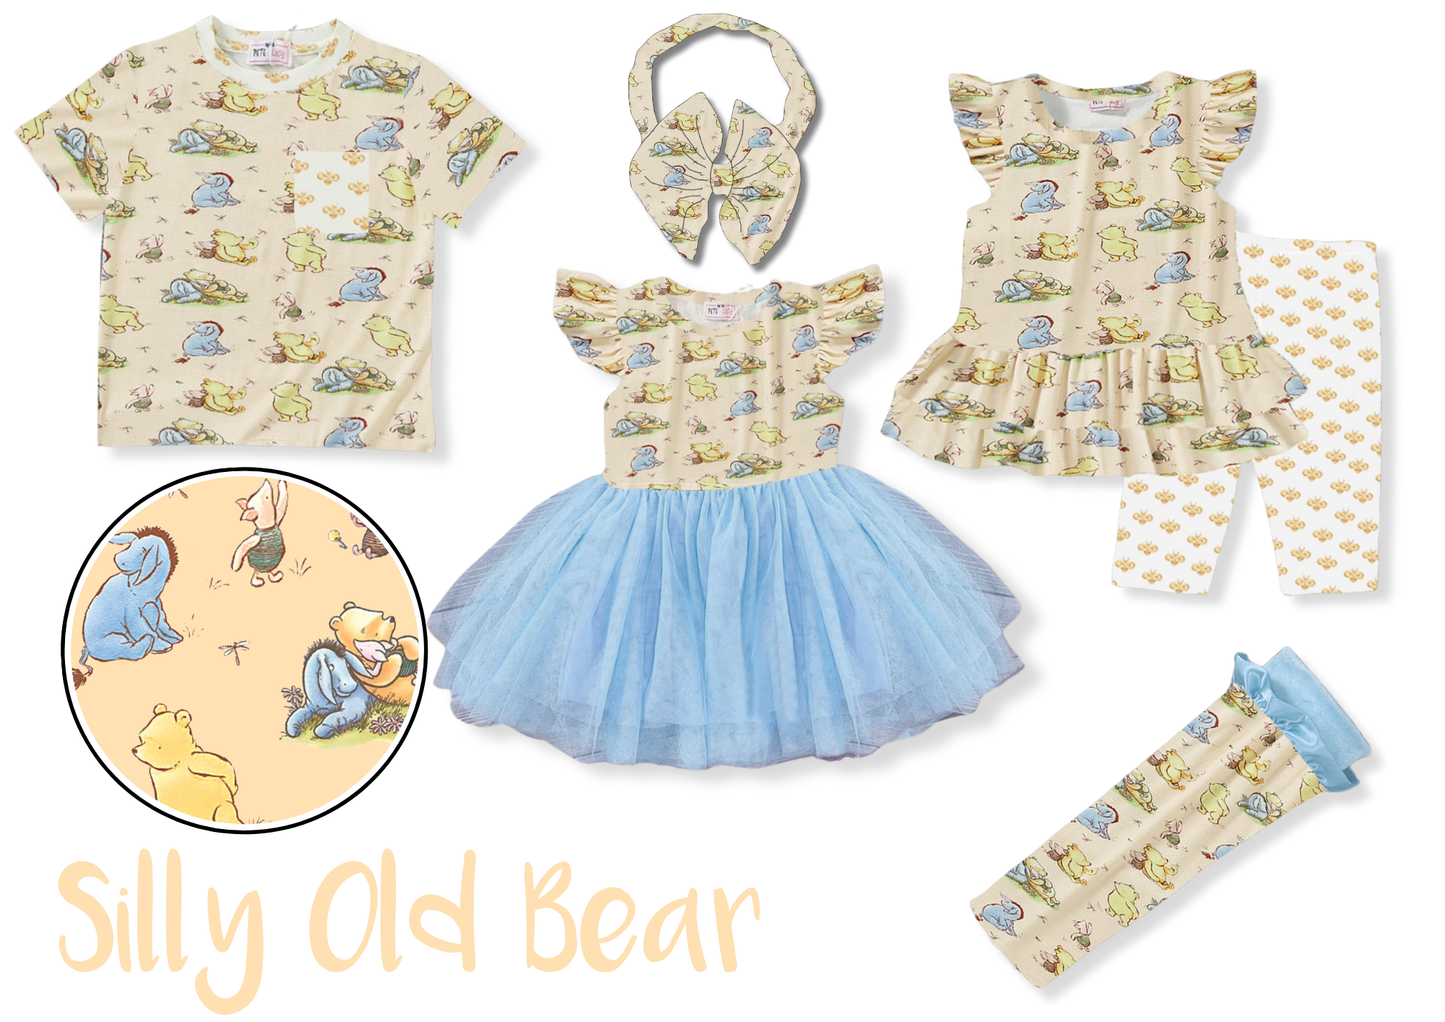 (Preorder) Silly Old Bear Boy’s Loungewear Set by Pete + Lucy